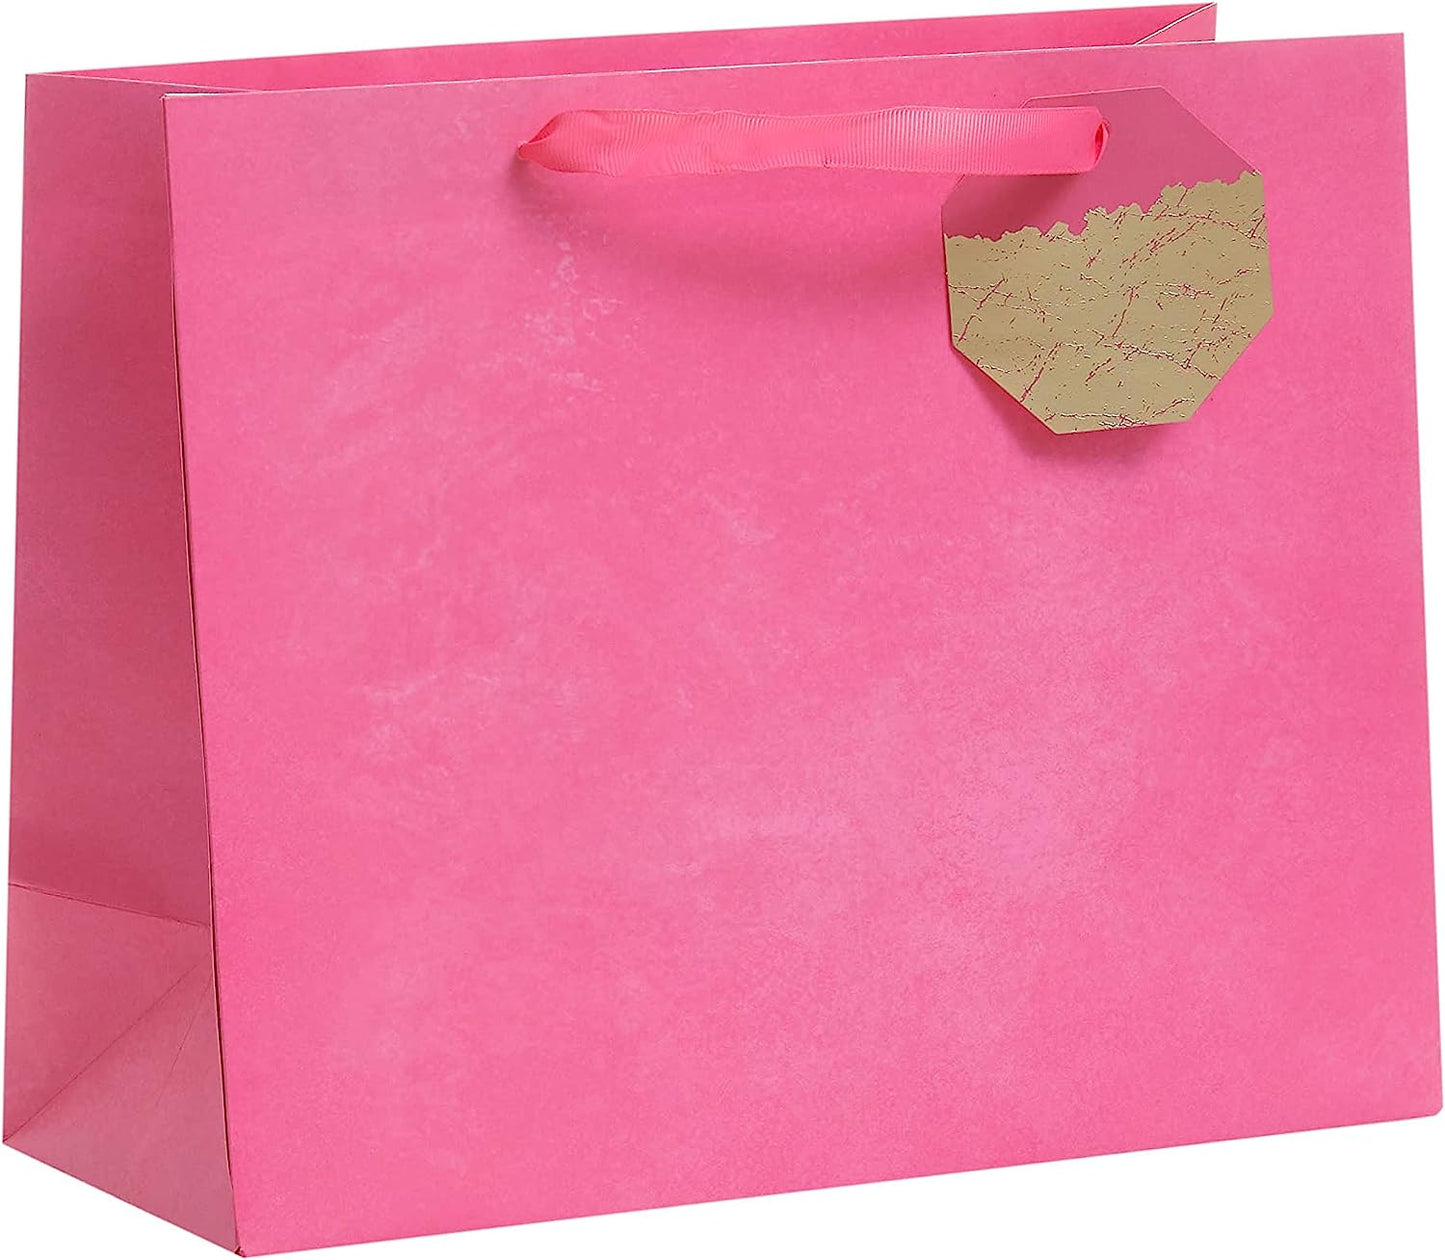 Pink Design Multipack Of 6 Large Gift Bags With Tags For Any Occasion For Her Mother's Day, Birthday